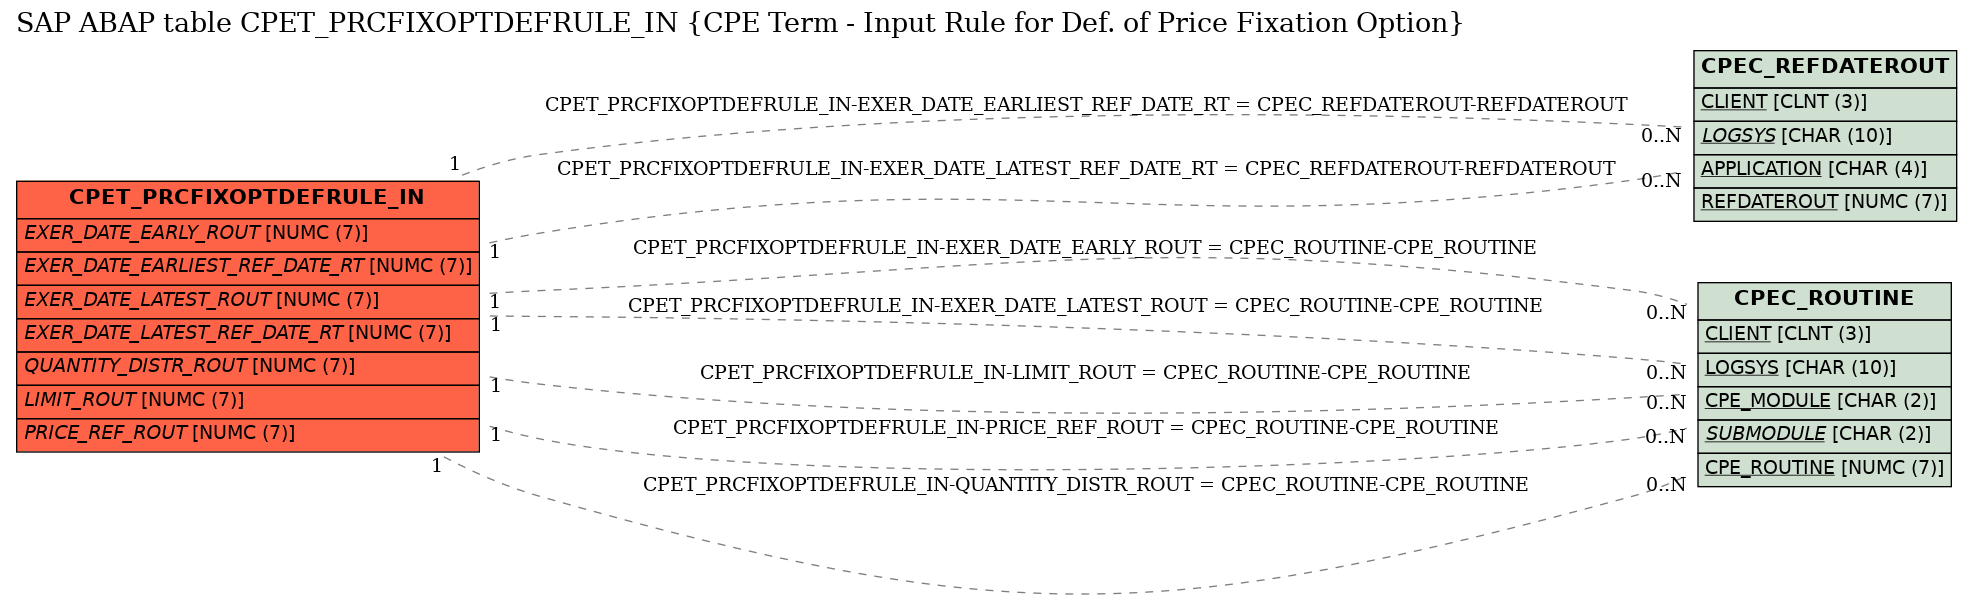 E-R Diagram for table CPET_PRCFIXOPTDEFRULE_IN (CPE Term - Input Rule for Def. of Price Fixation Option)